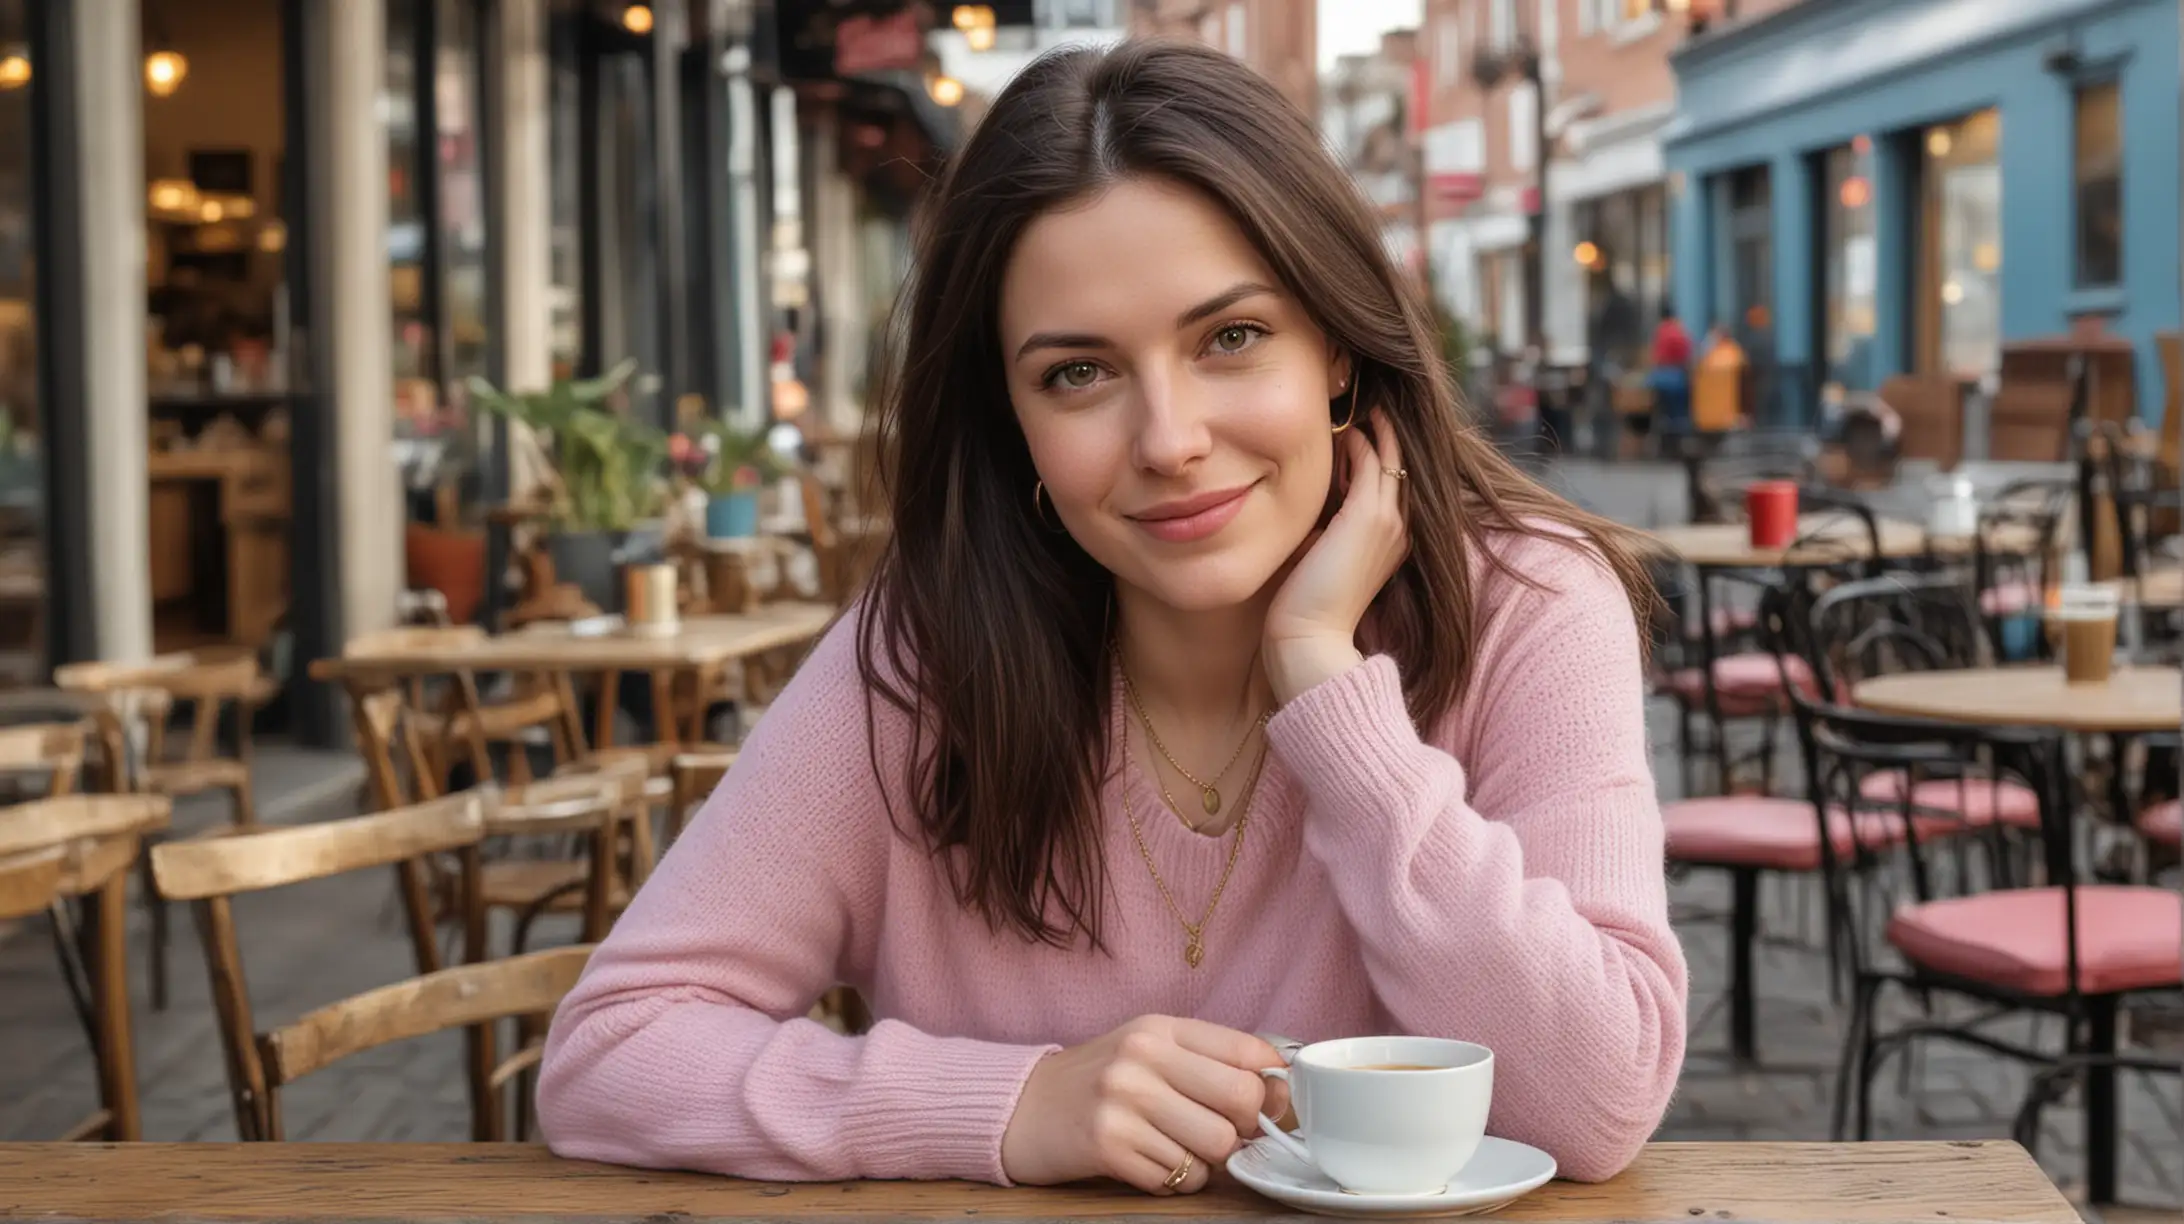 30 year old pale white woman, long dark brown hair parted to the right, pink sweater, blue jeans and a gold necklace, sitting at an outdoor city cafe table with one cup of tea and one teapot